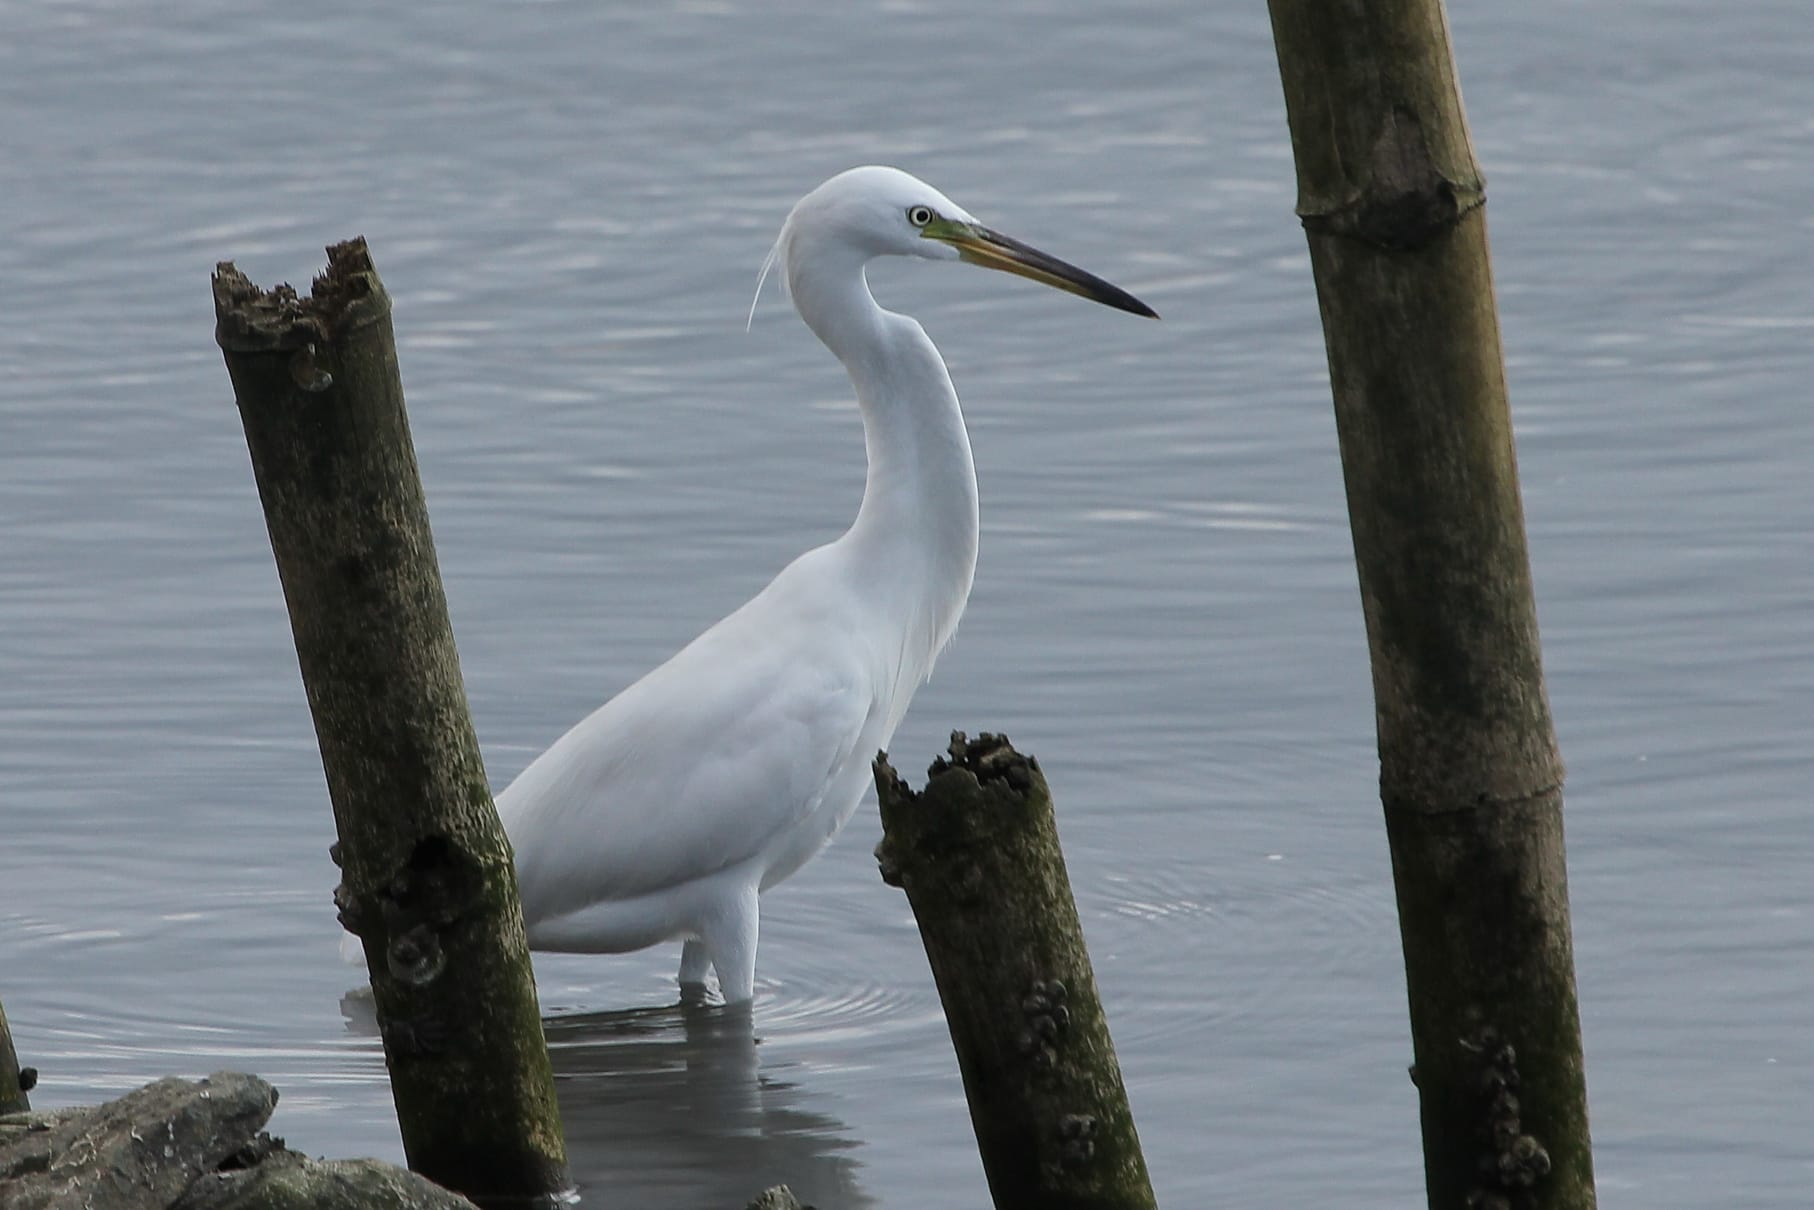 Chinese Egret seen from the Bamboo Bridge. Photo by Christian Perez.